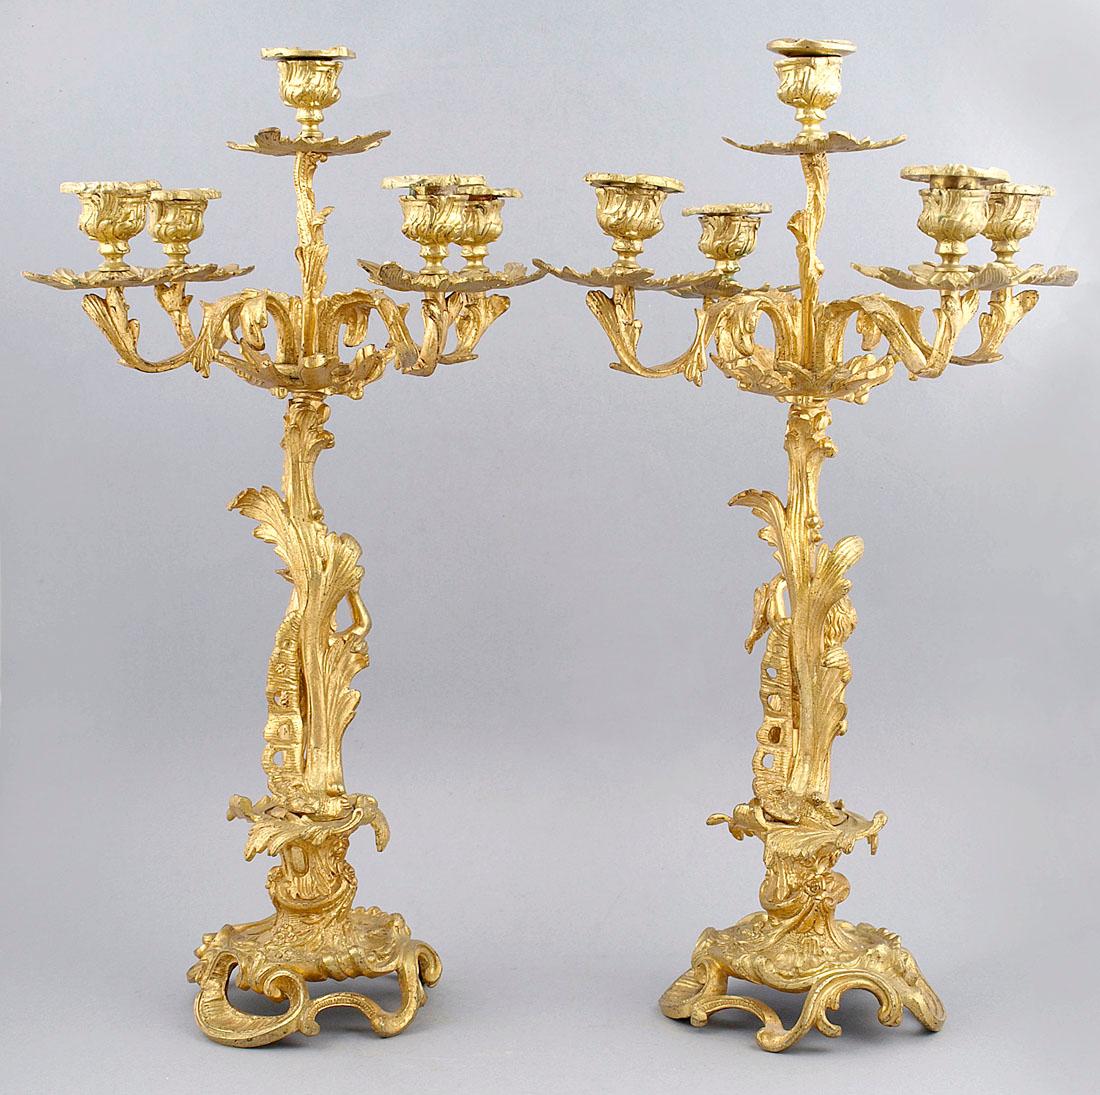 A pair of five-candle candelabra with an openwork, circular-shaped base with elements of shells and flowers with rocaille elements. Four arms extending to the sides and one extending above in the center of the candlestick. Each of the arms is bent,